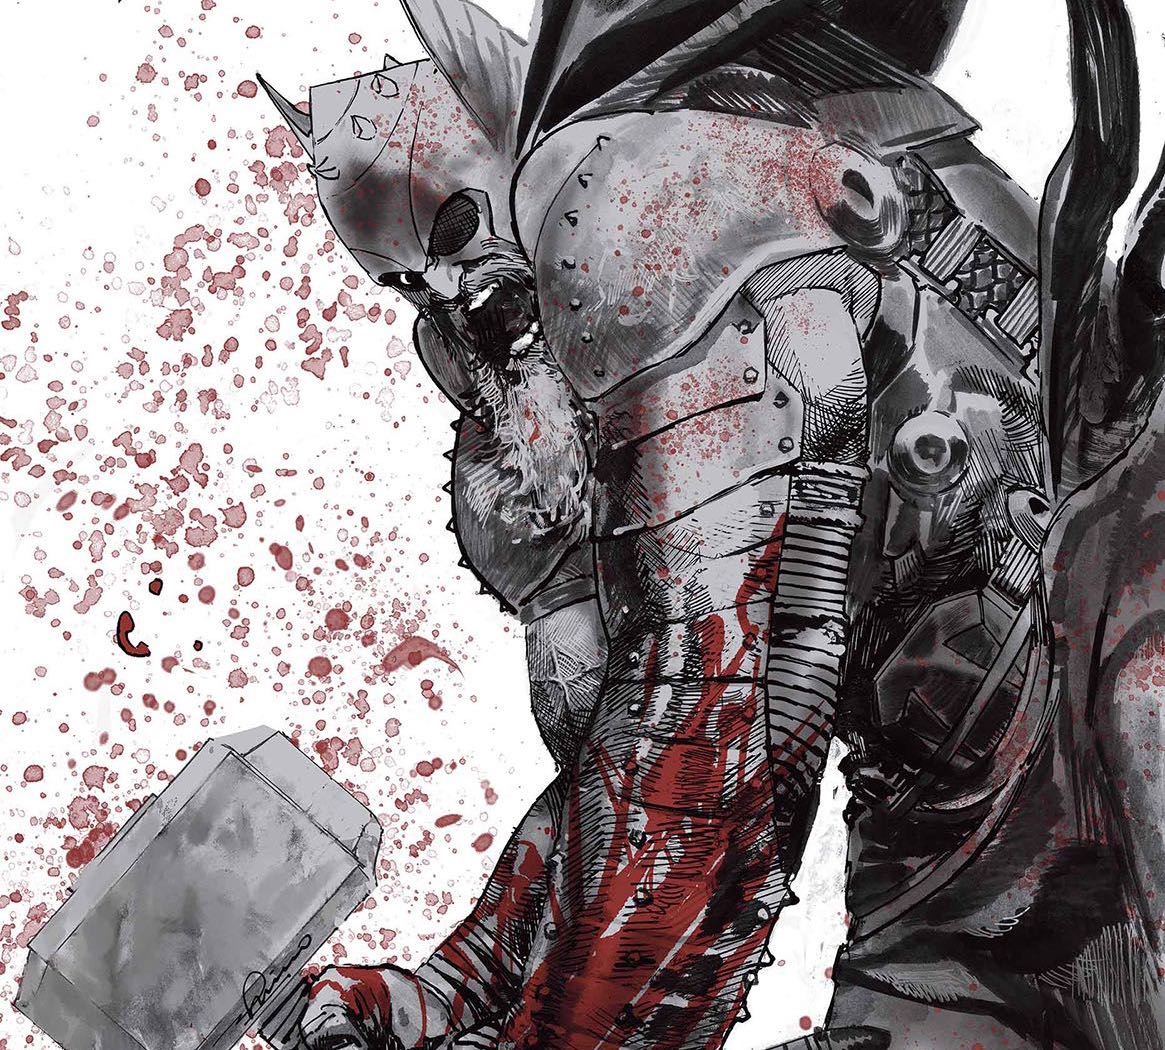 King Thor #1 review: An epic story dark in mood and spectacle